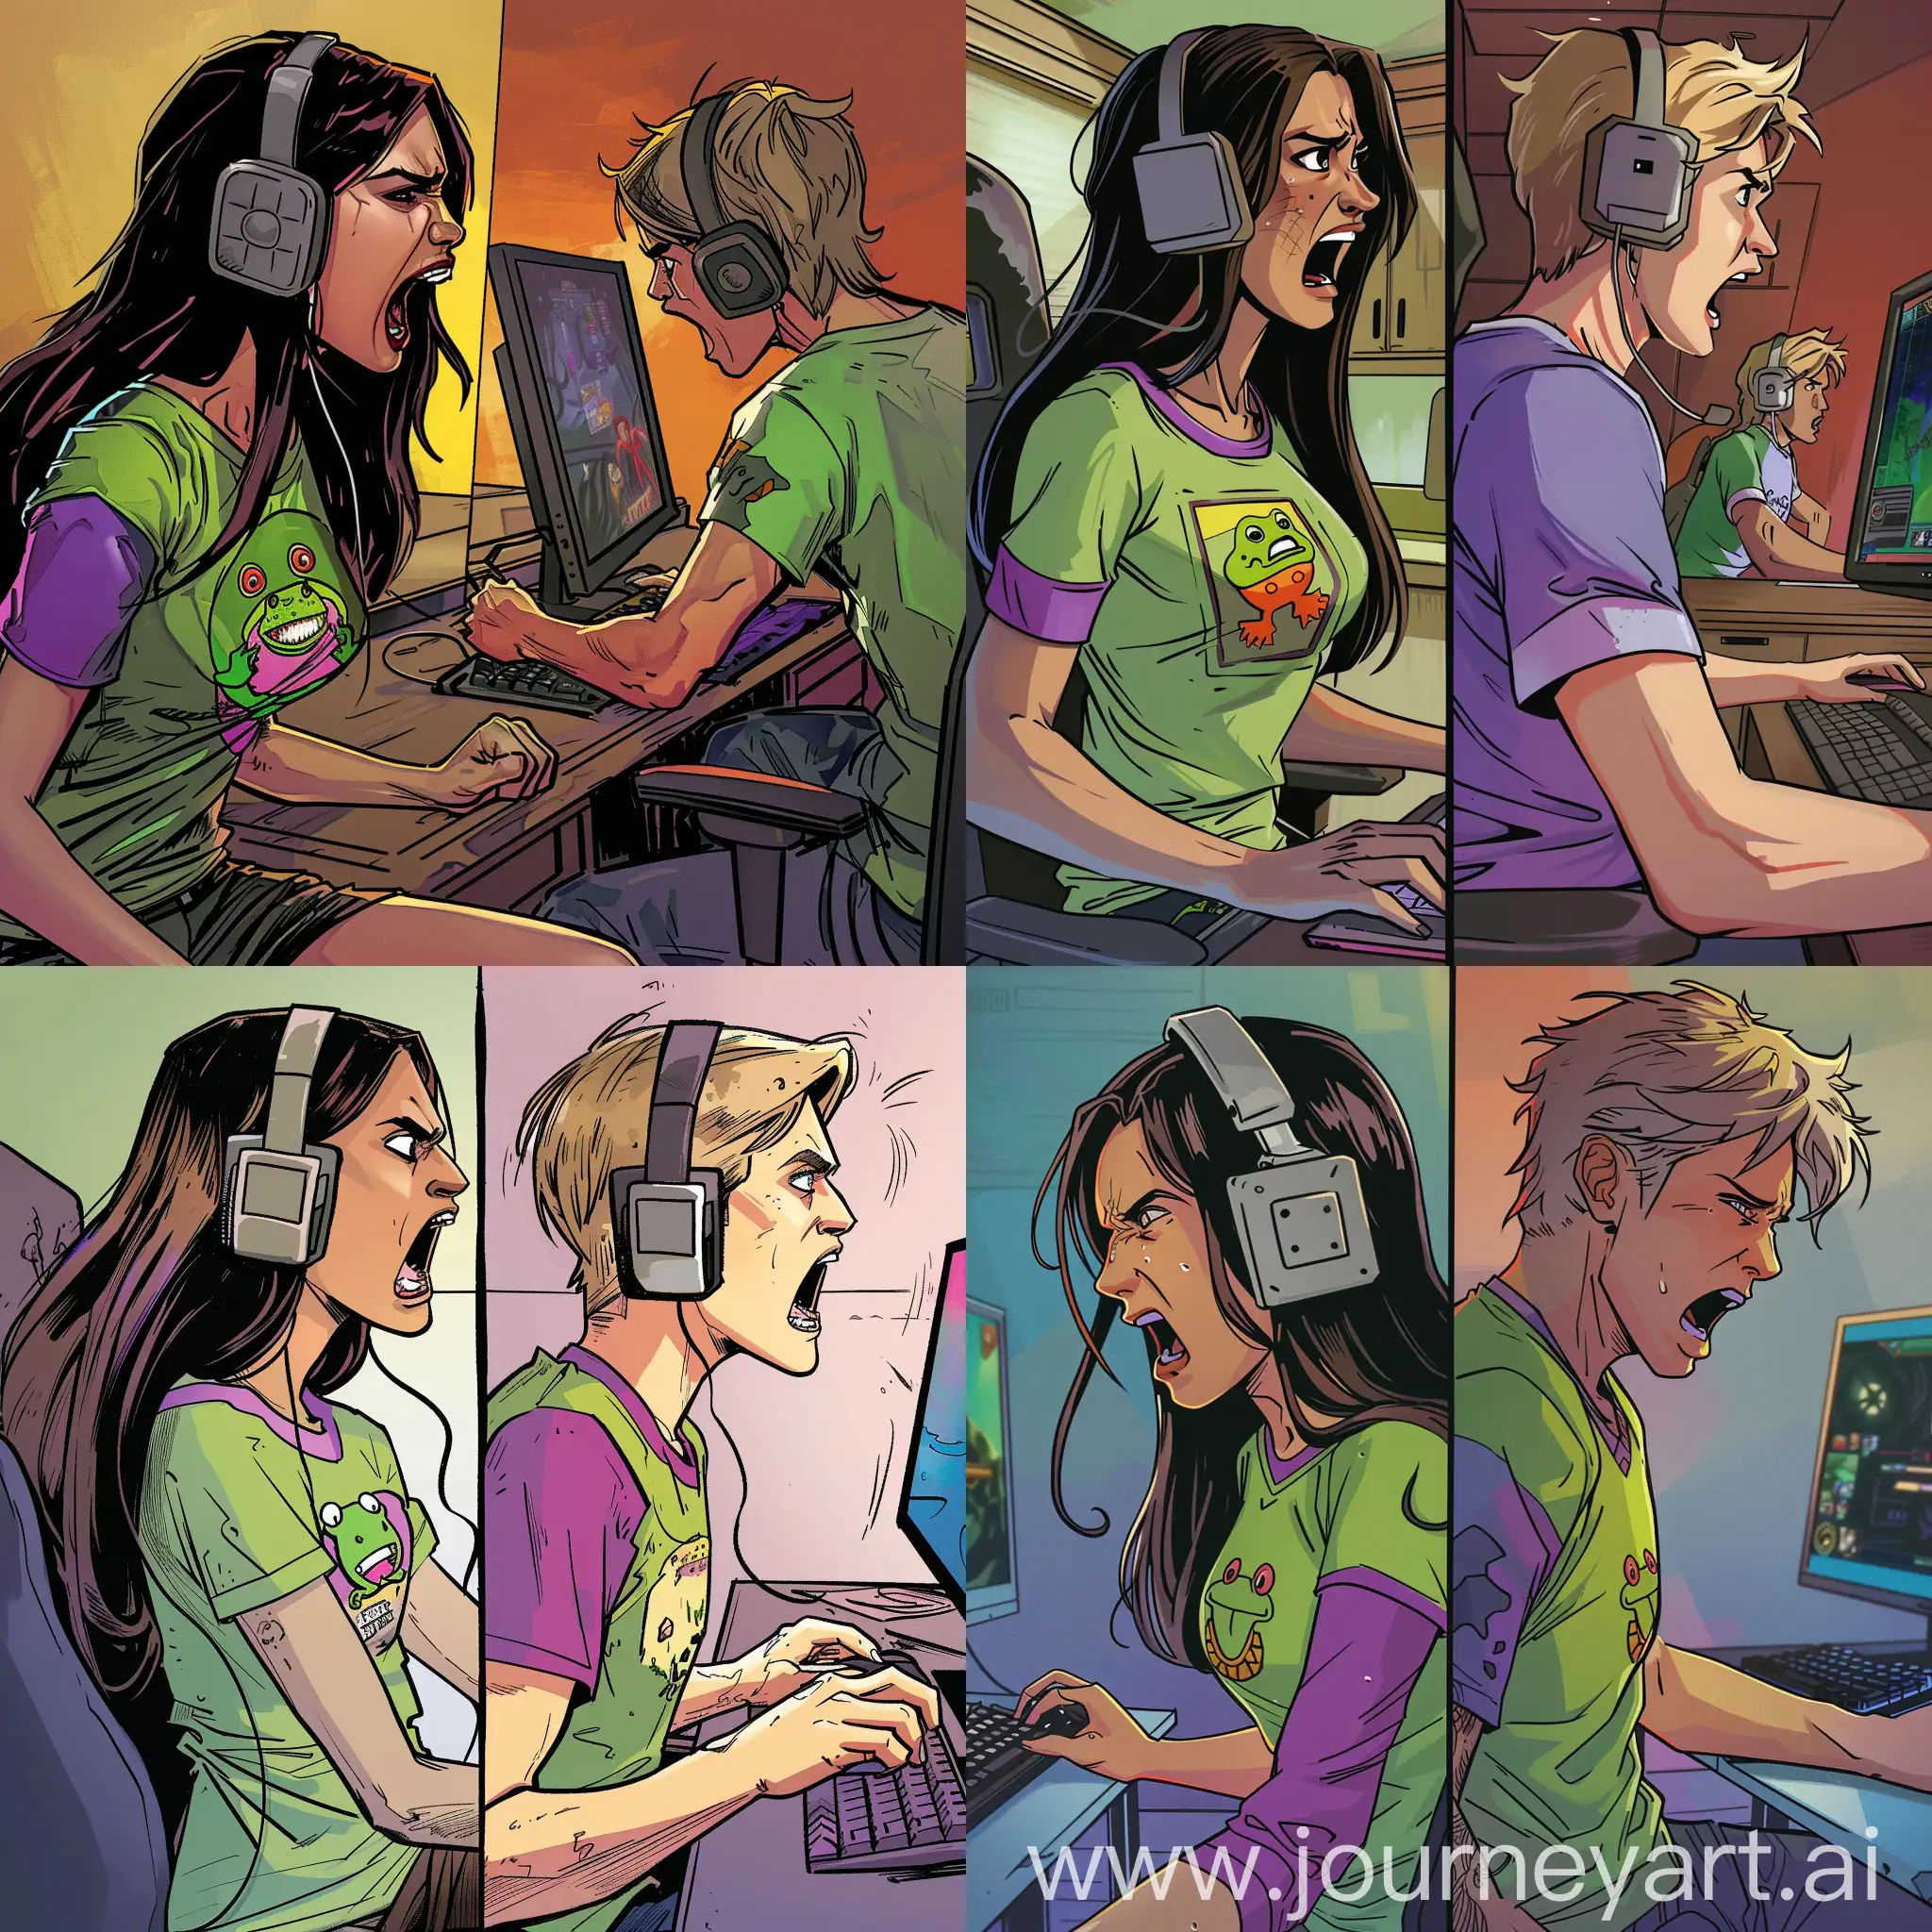 Furious-Gamers-Cartoon-Comic-Style-Illustration-of-Two-Intense-Gamers-in-Separate-Rooms